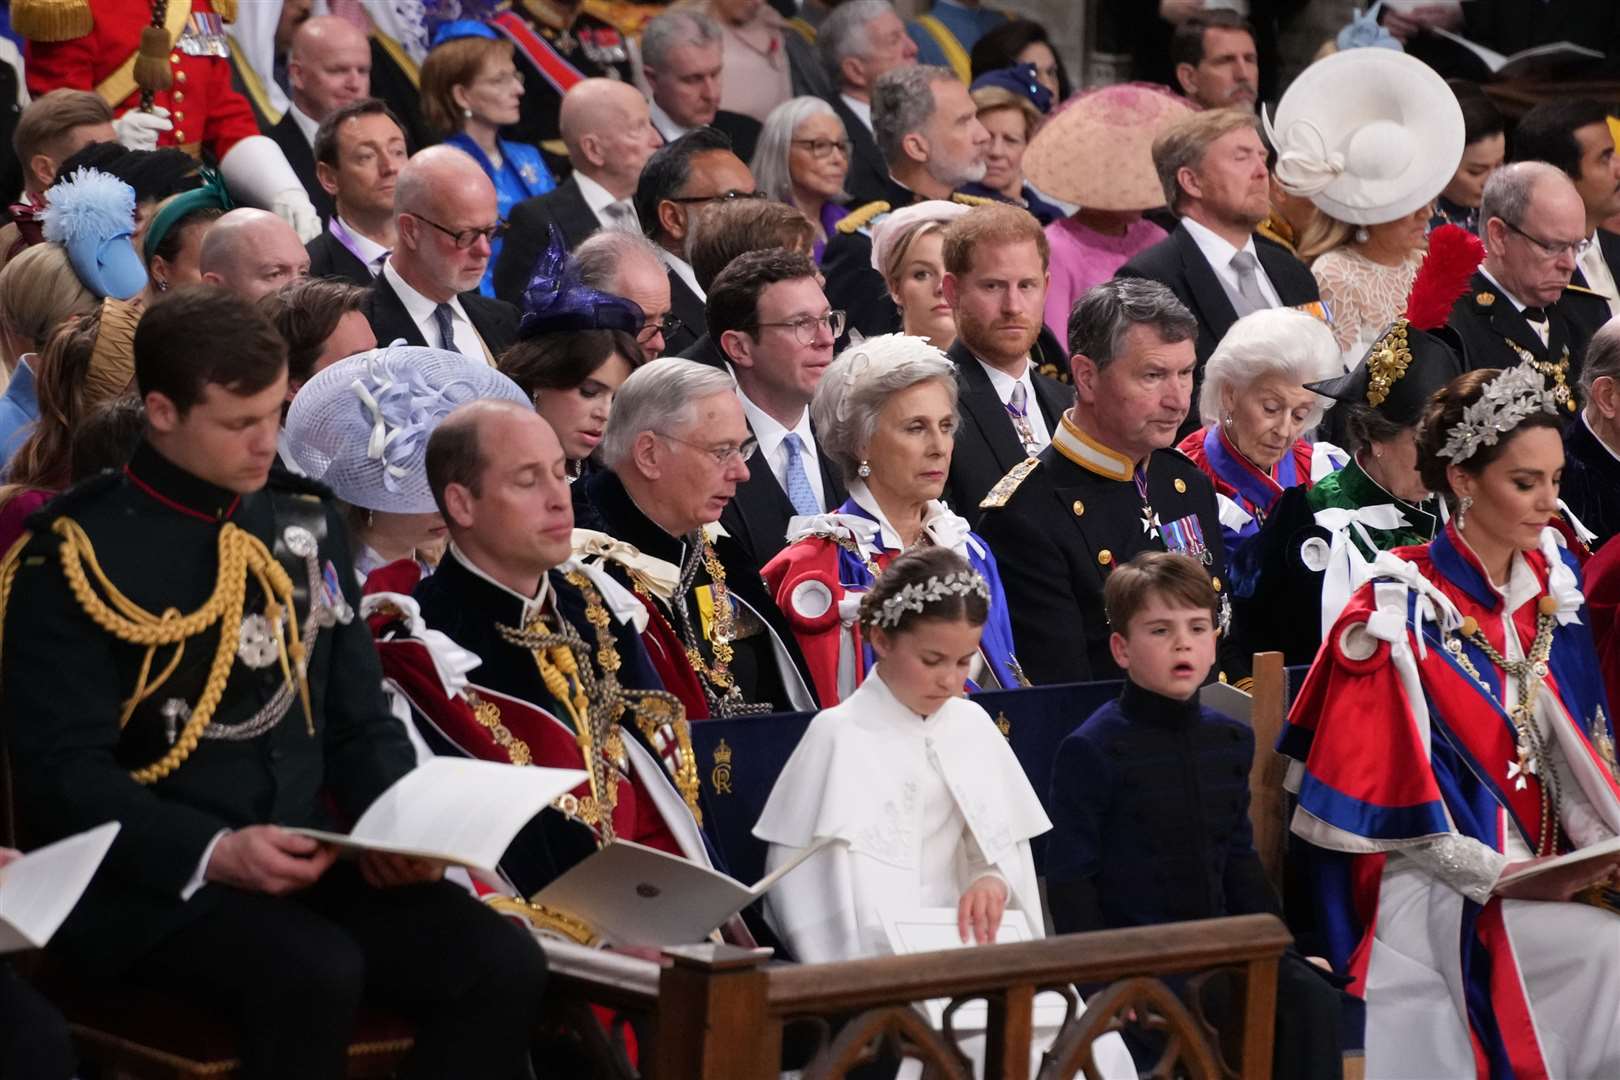 Harry in the third row behind the Waleses, the Duke and Duchess of Gloucester and Vice Admiral Timothy Laurence during the coronation ceremony (Victoria Jones/PA)